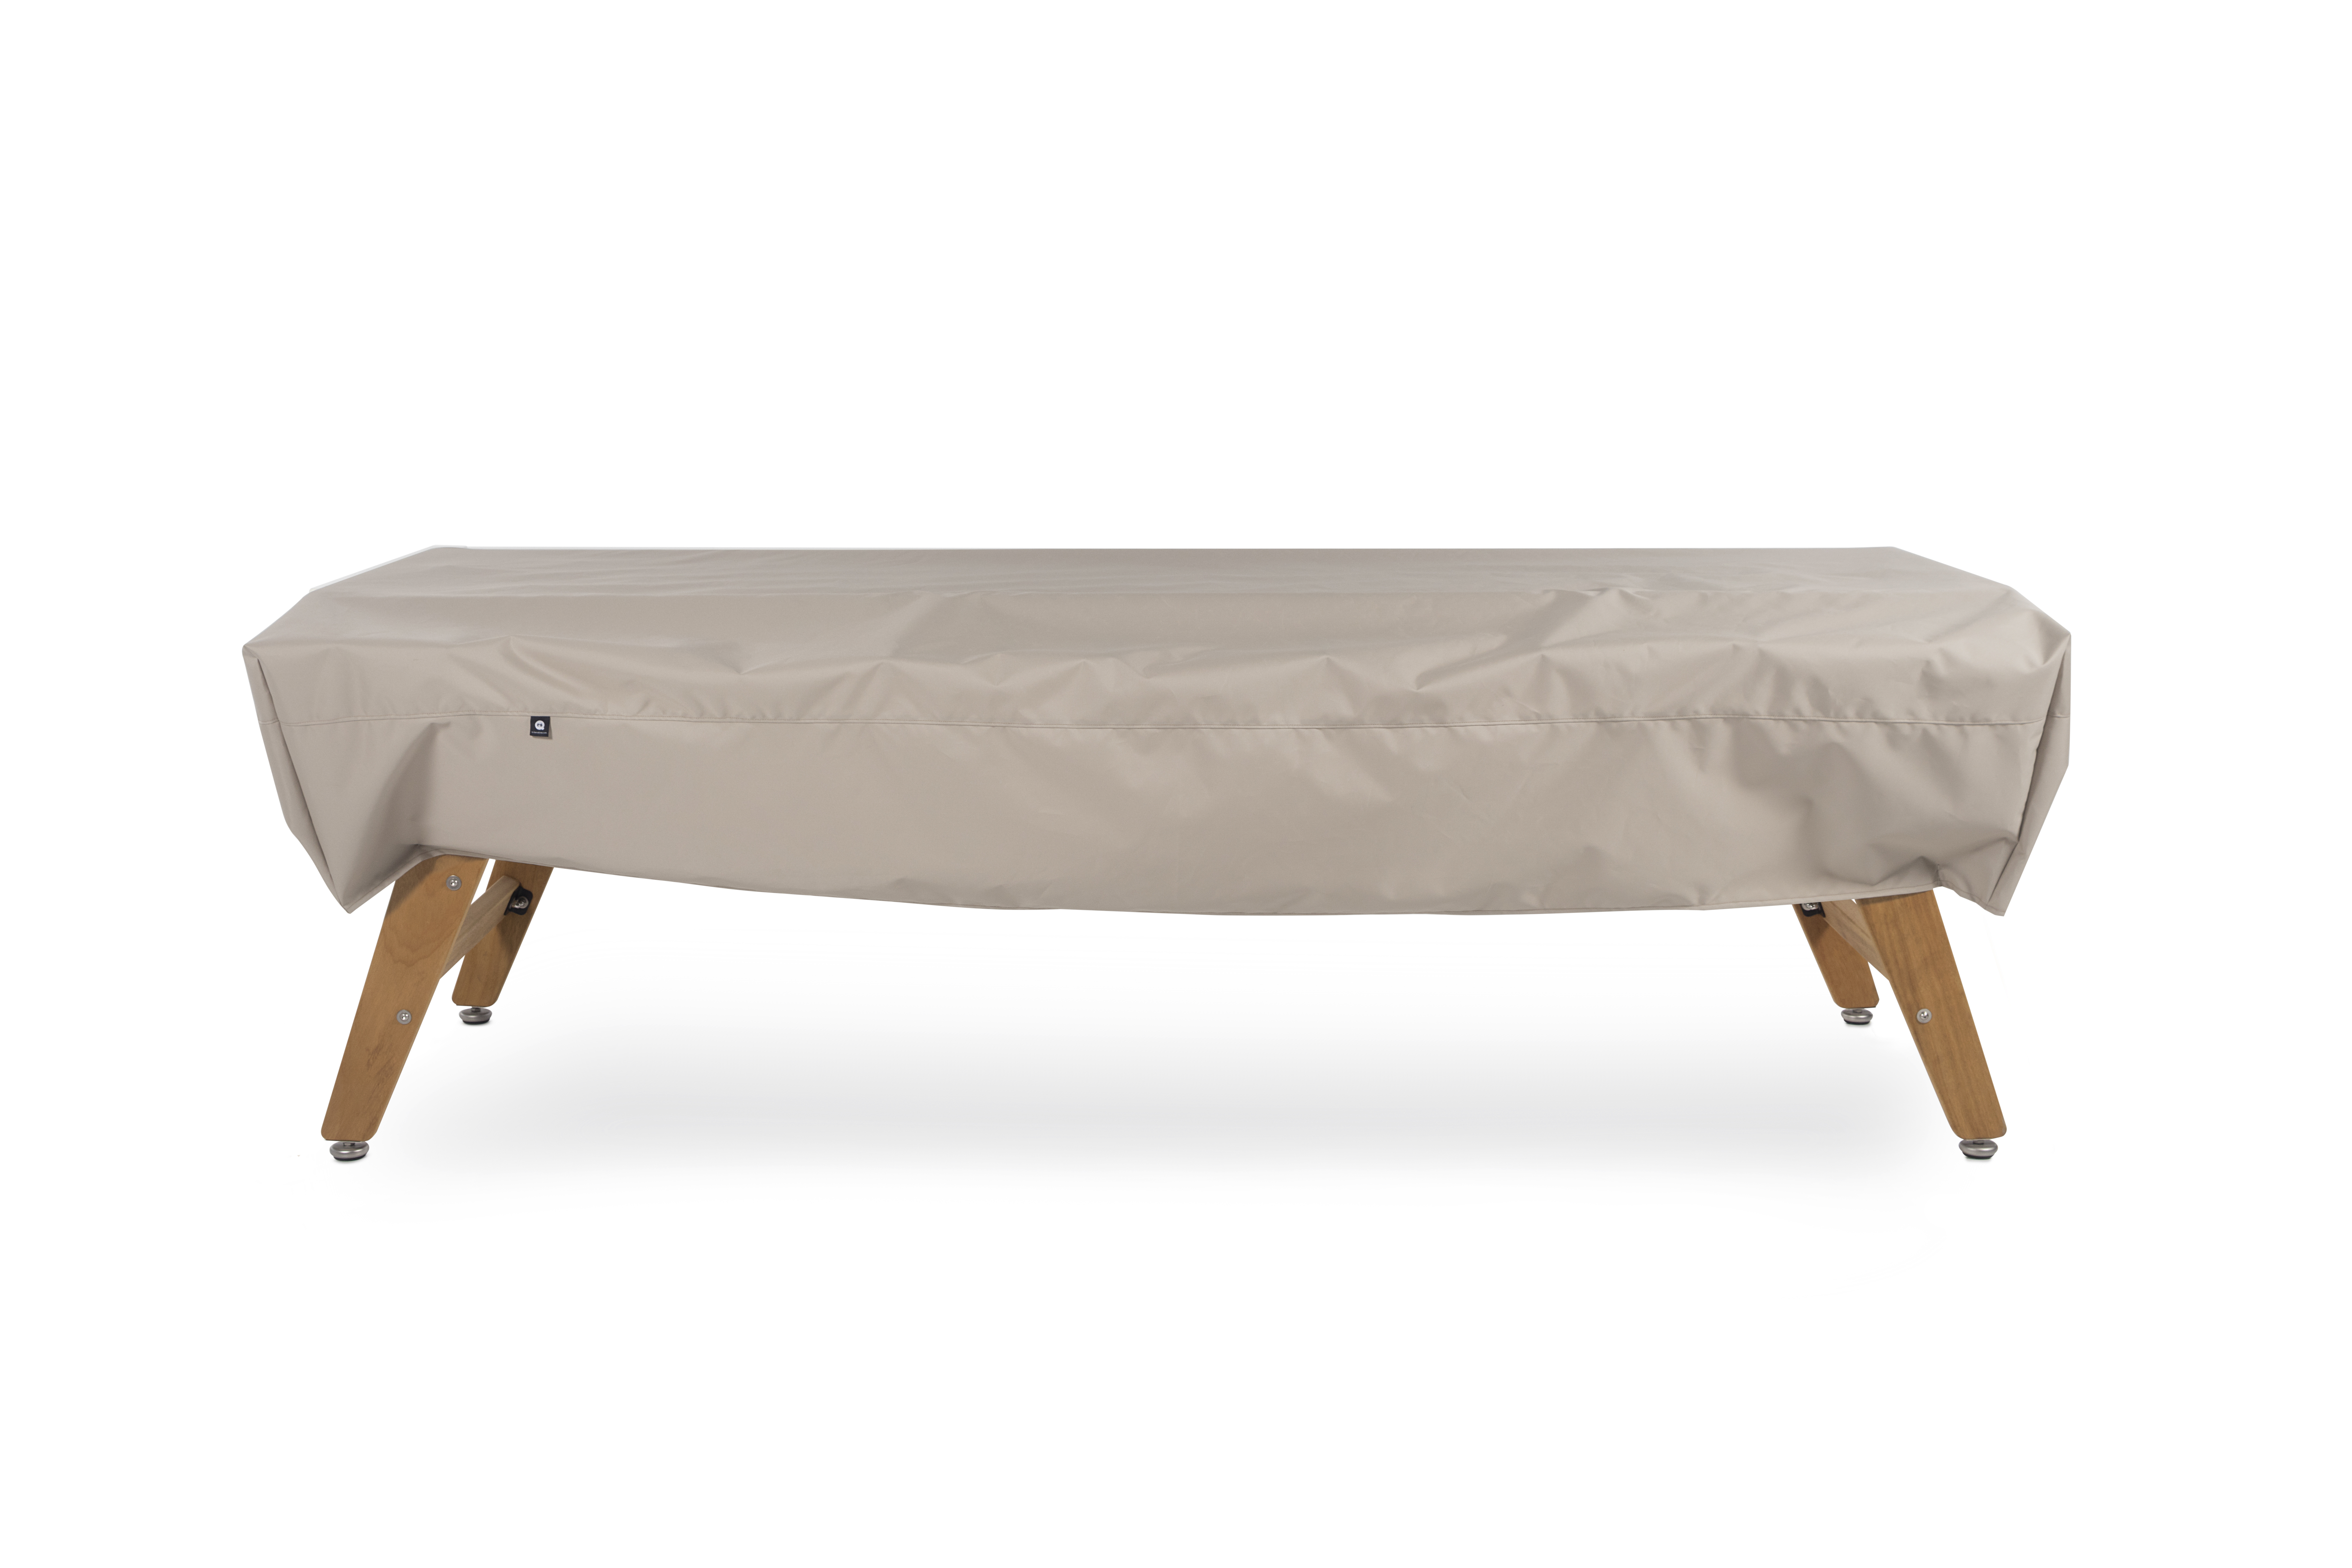 Football table cover "stadium roof" - Matching the RS# football table line